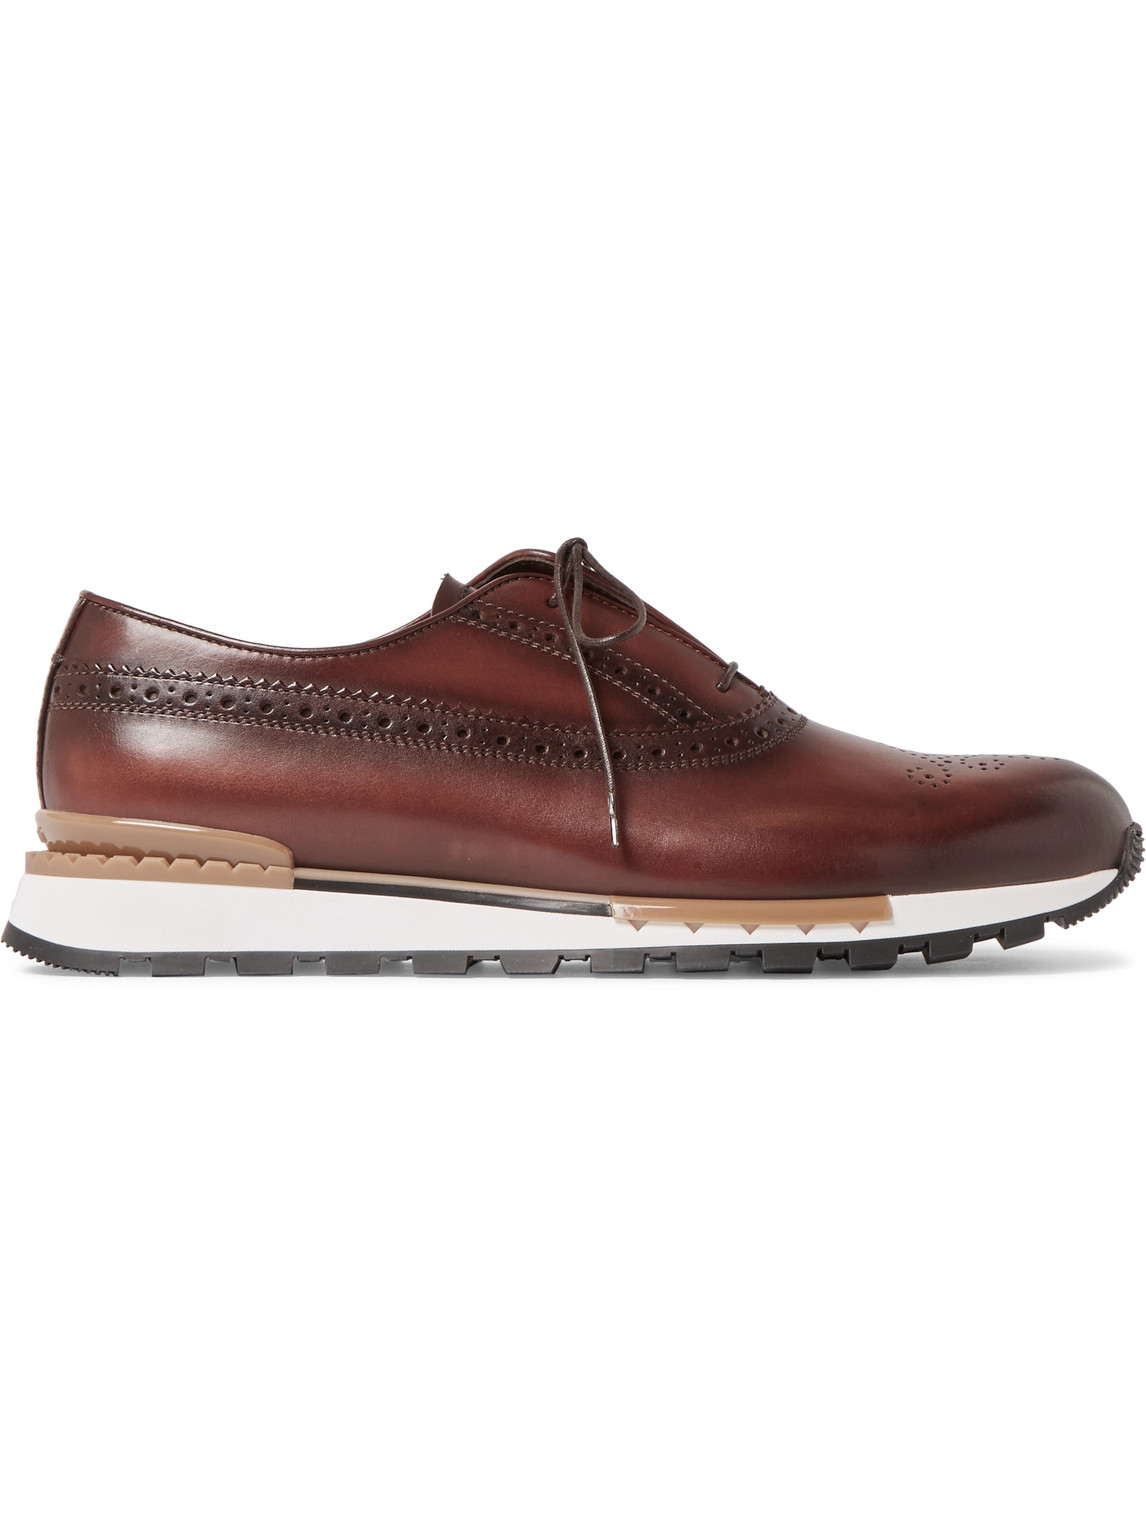 BERLUTI FAST TRACK LEATHER SNEAKERS